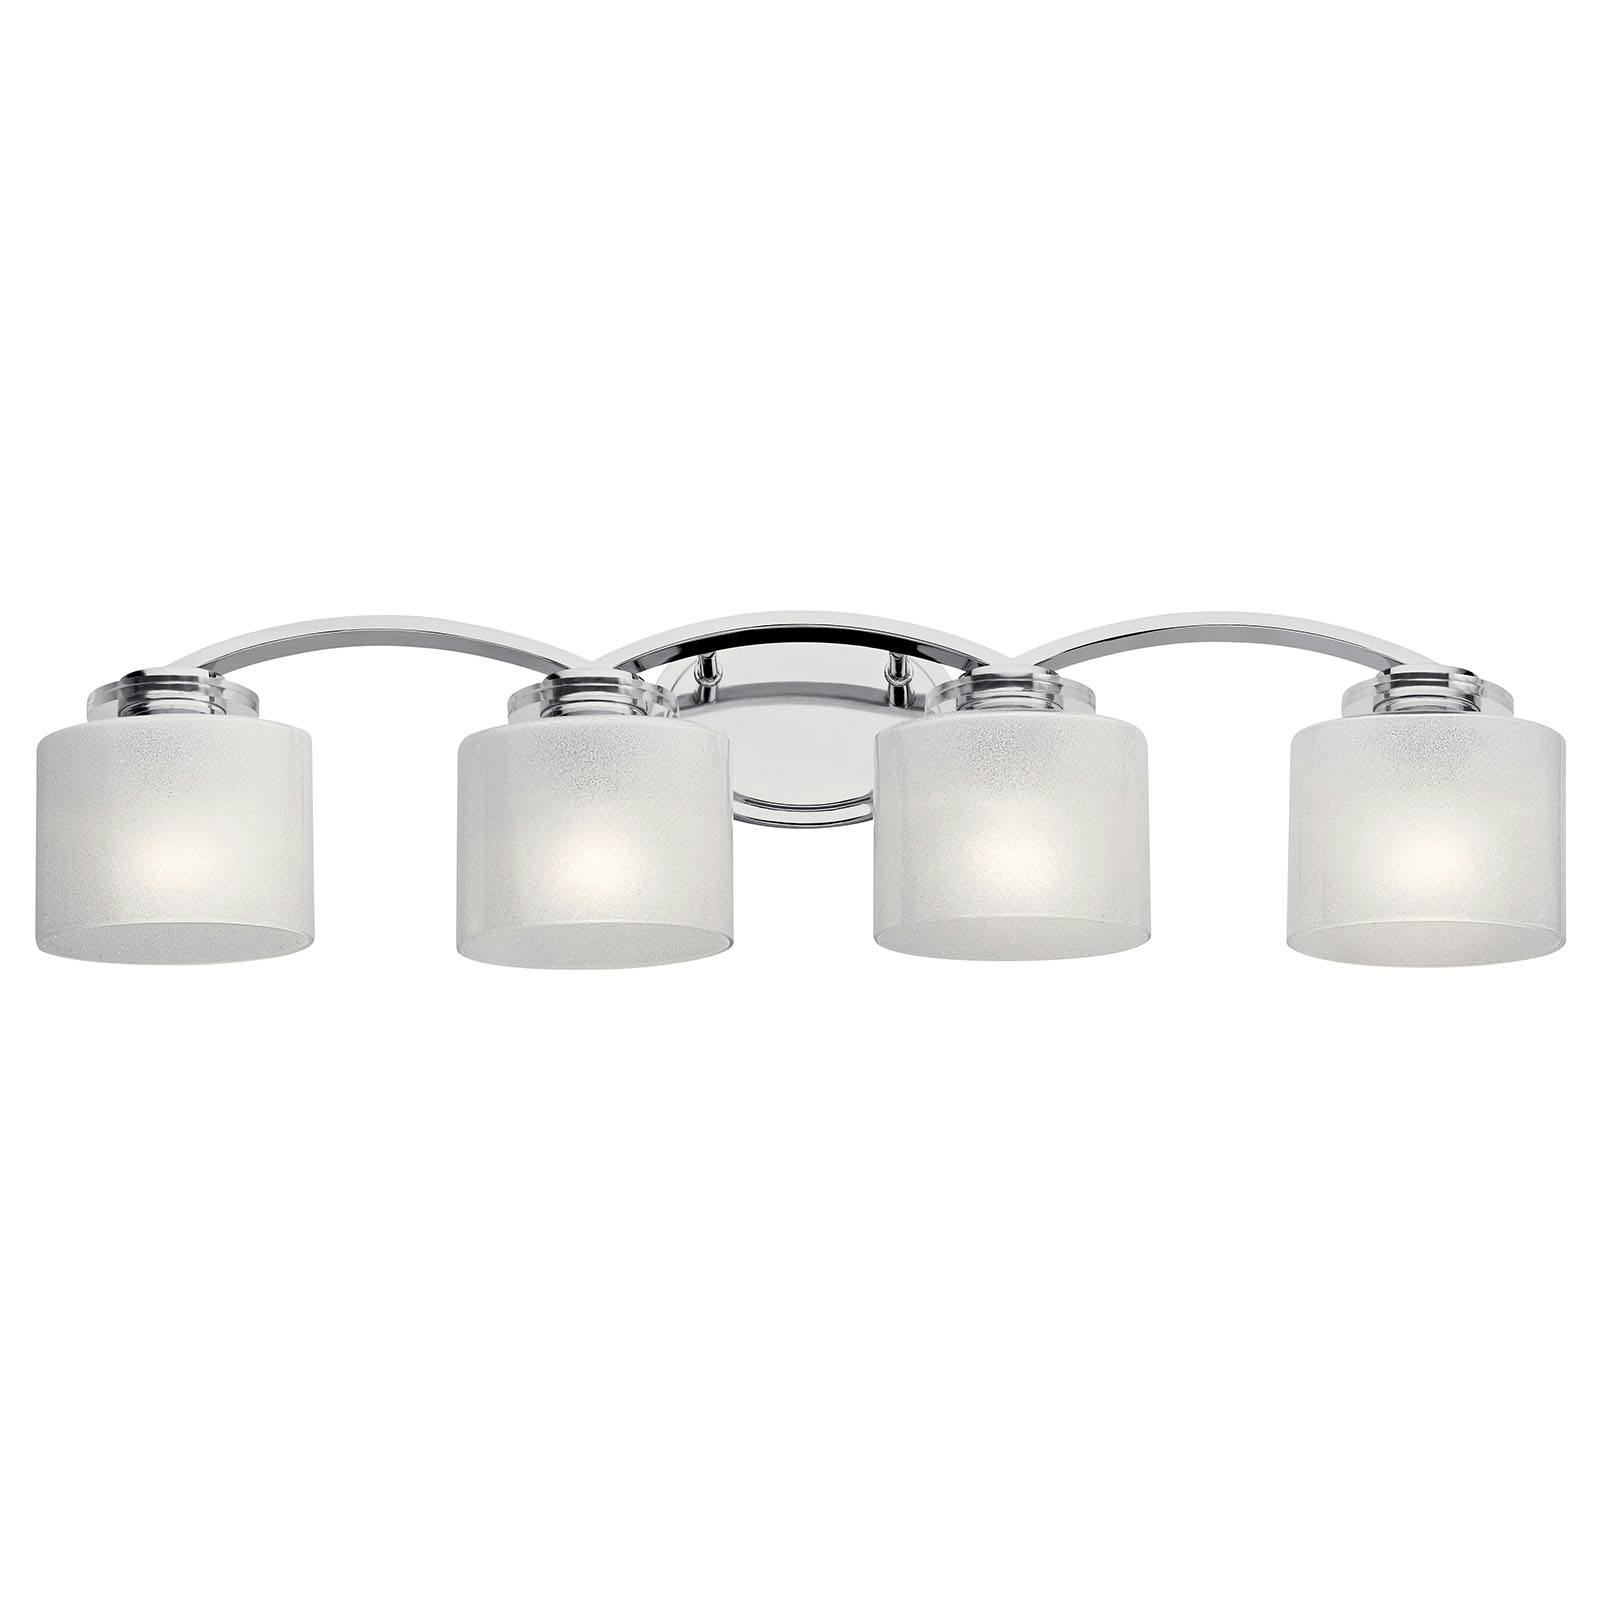 The Archer 4 Light Vanity Light Chrome facing down on a white background